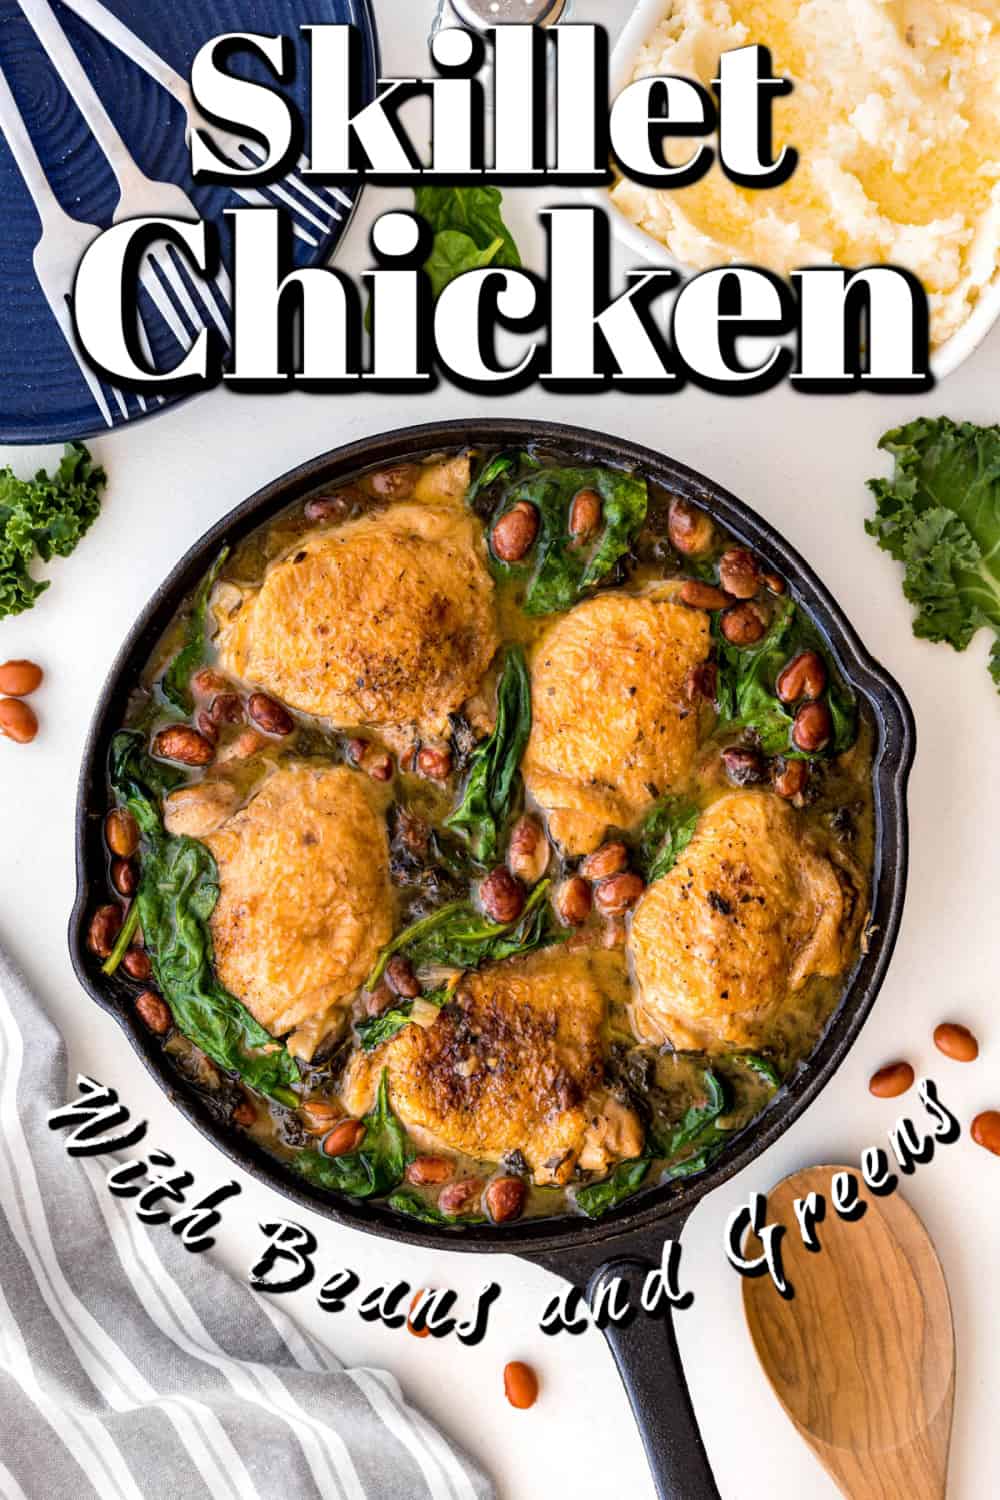 Skillet Chicken with Beans and Greens PIn